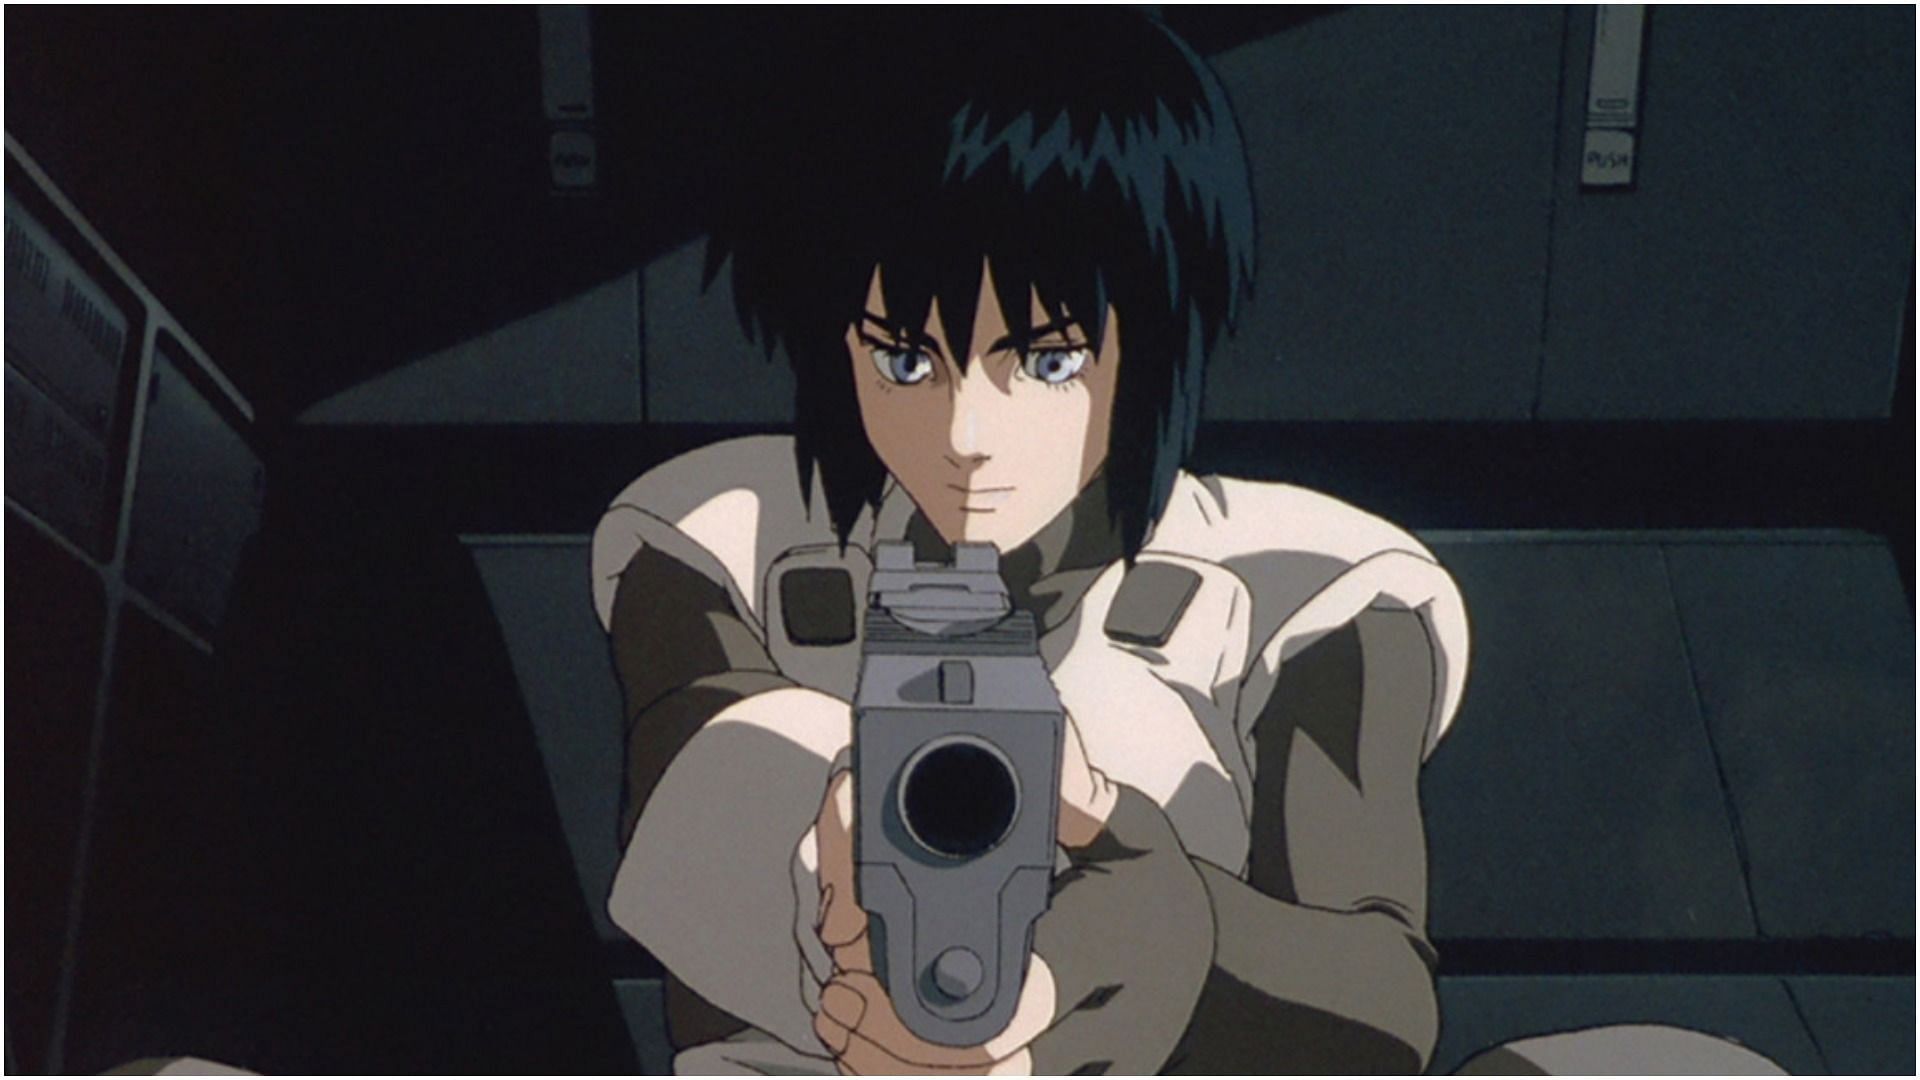 Matoko Kusanagi as seen in the anime Ghost in a Shell (Image via Production I.G.)